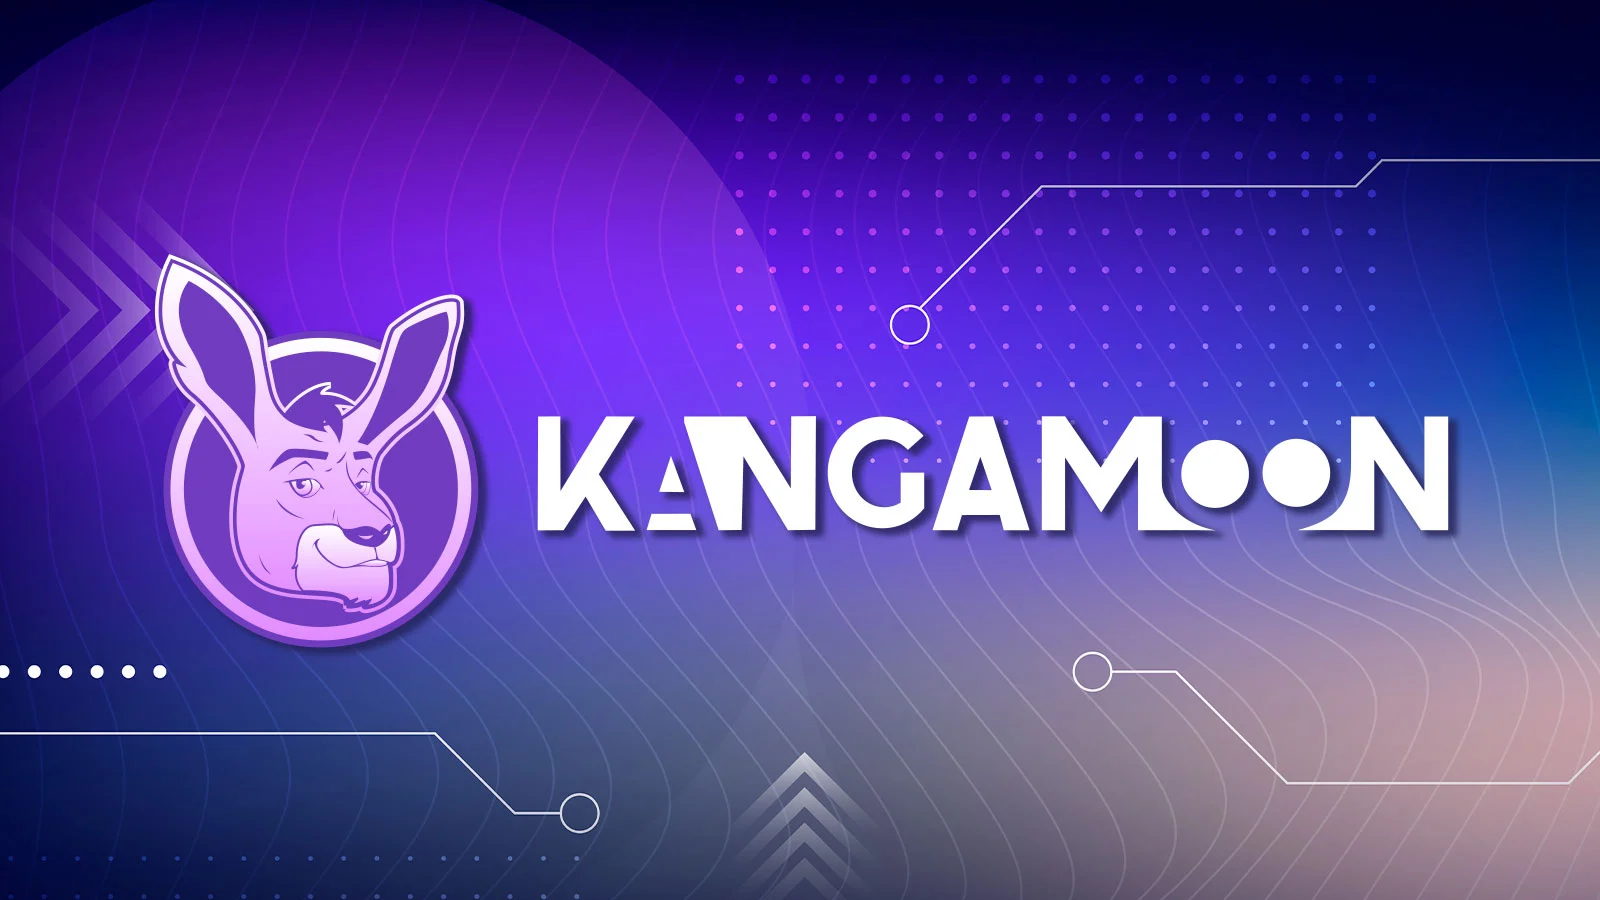 MoonBag’s Referral System: A Magnet for Kangamoon Investors